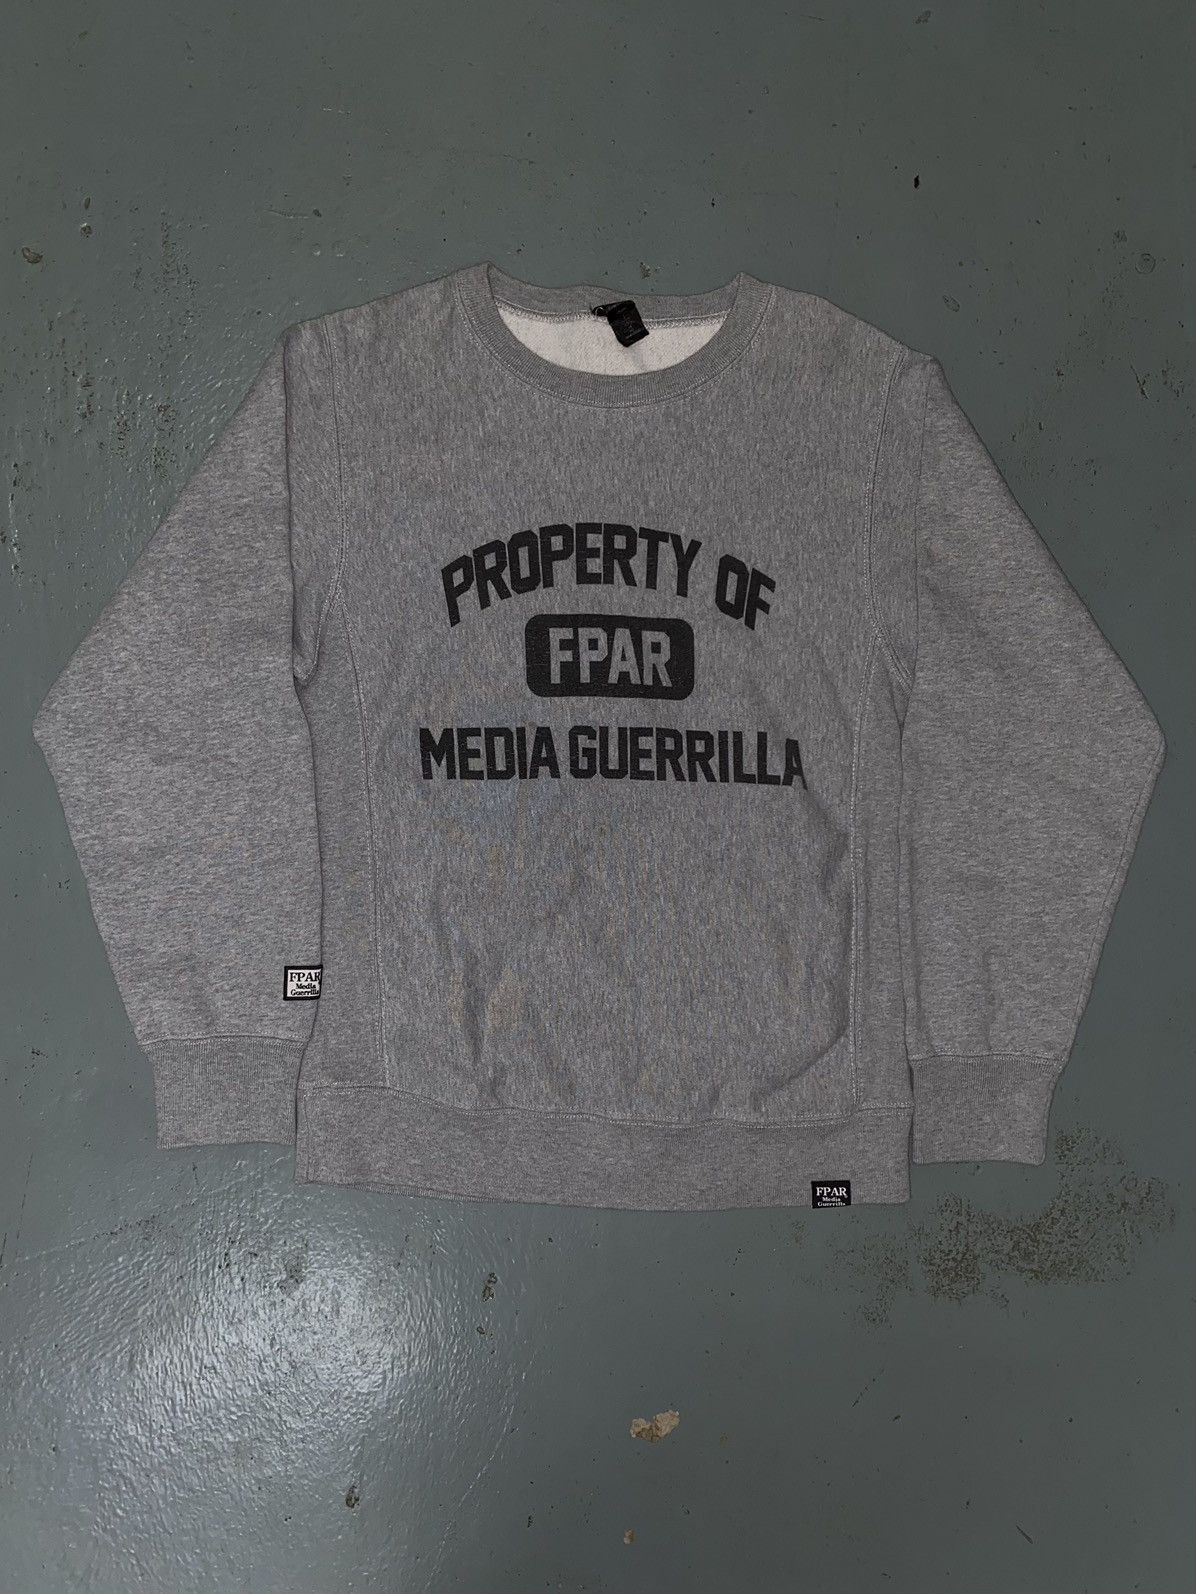 Forty Percent Against Rights (Fpar) | Grailed